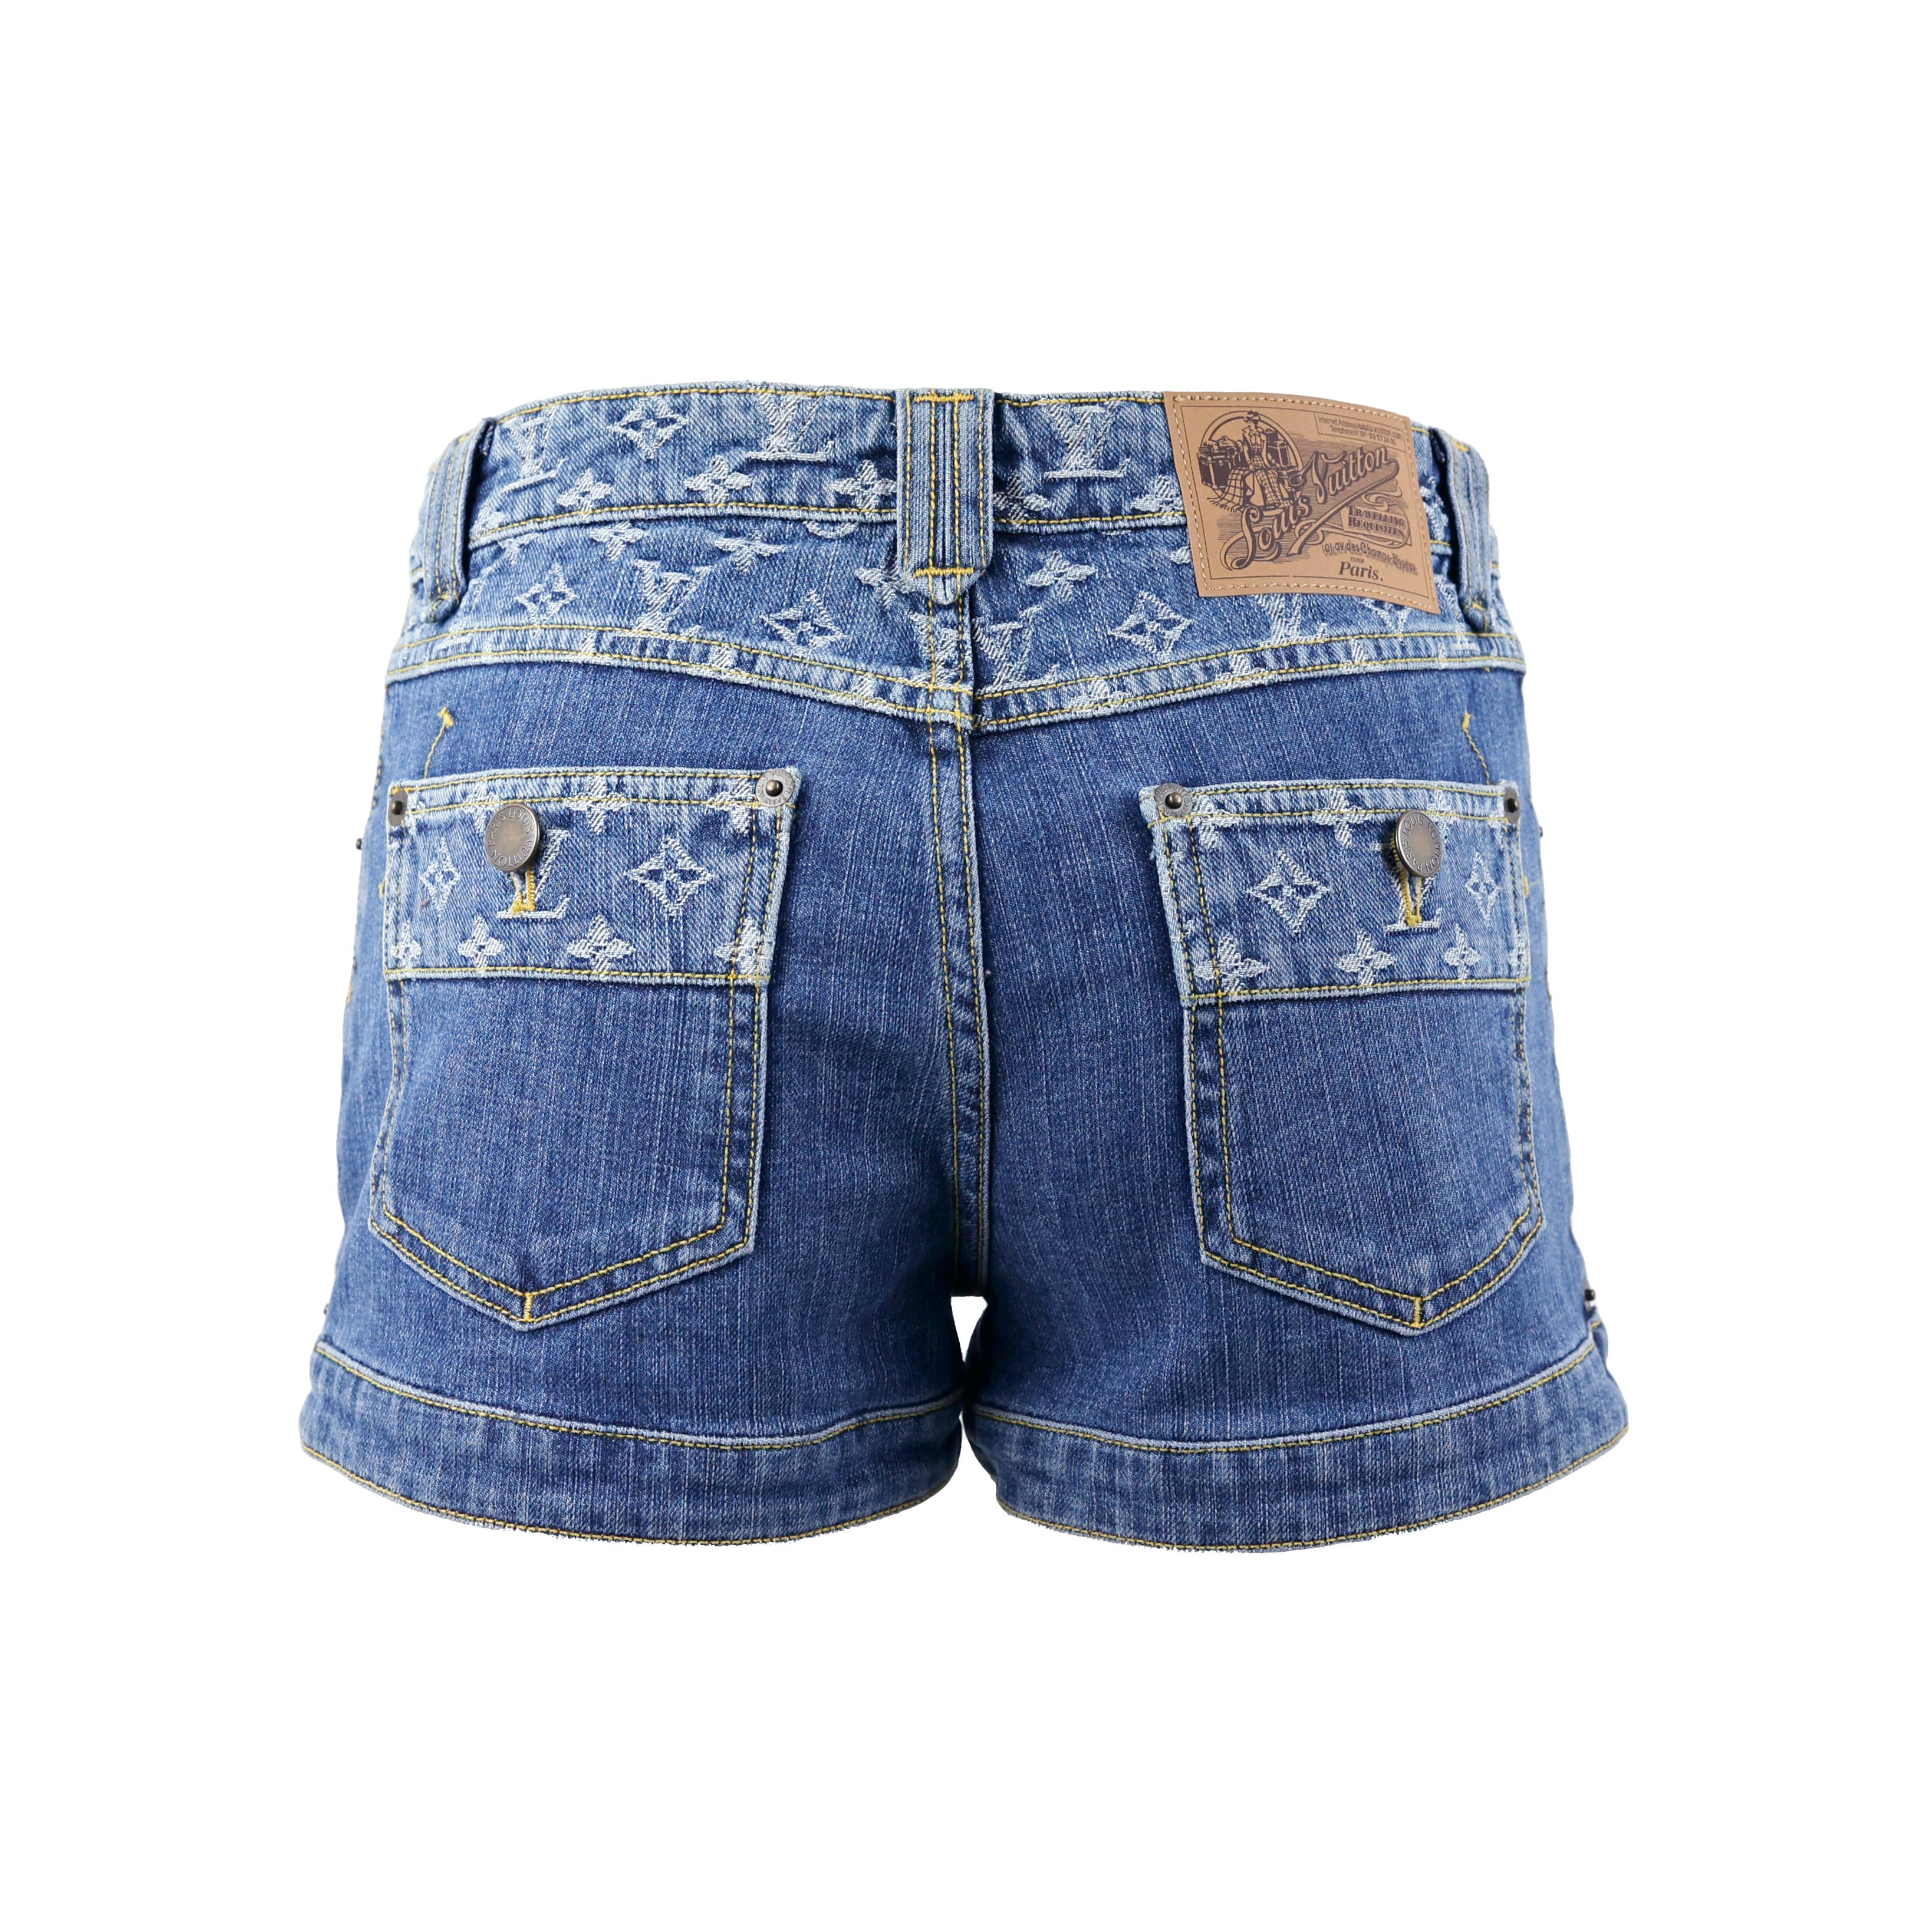 Louis Vuitton shorts in denim color blue, size 38 IT.


Condition:
Really good.